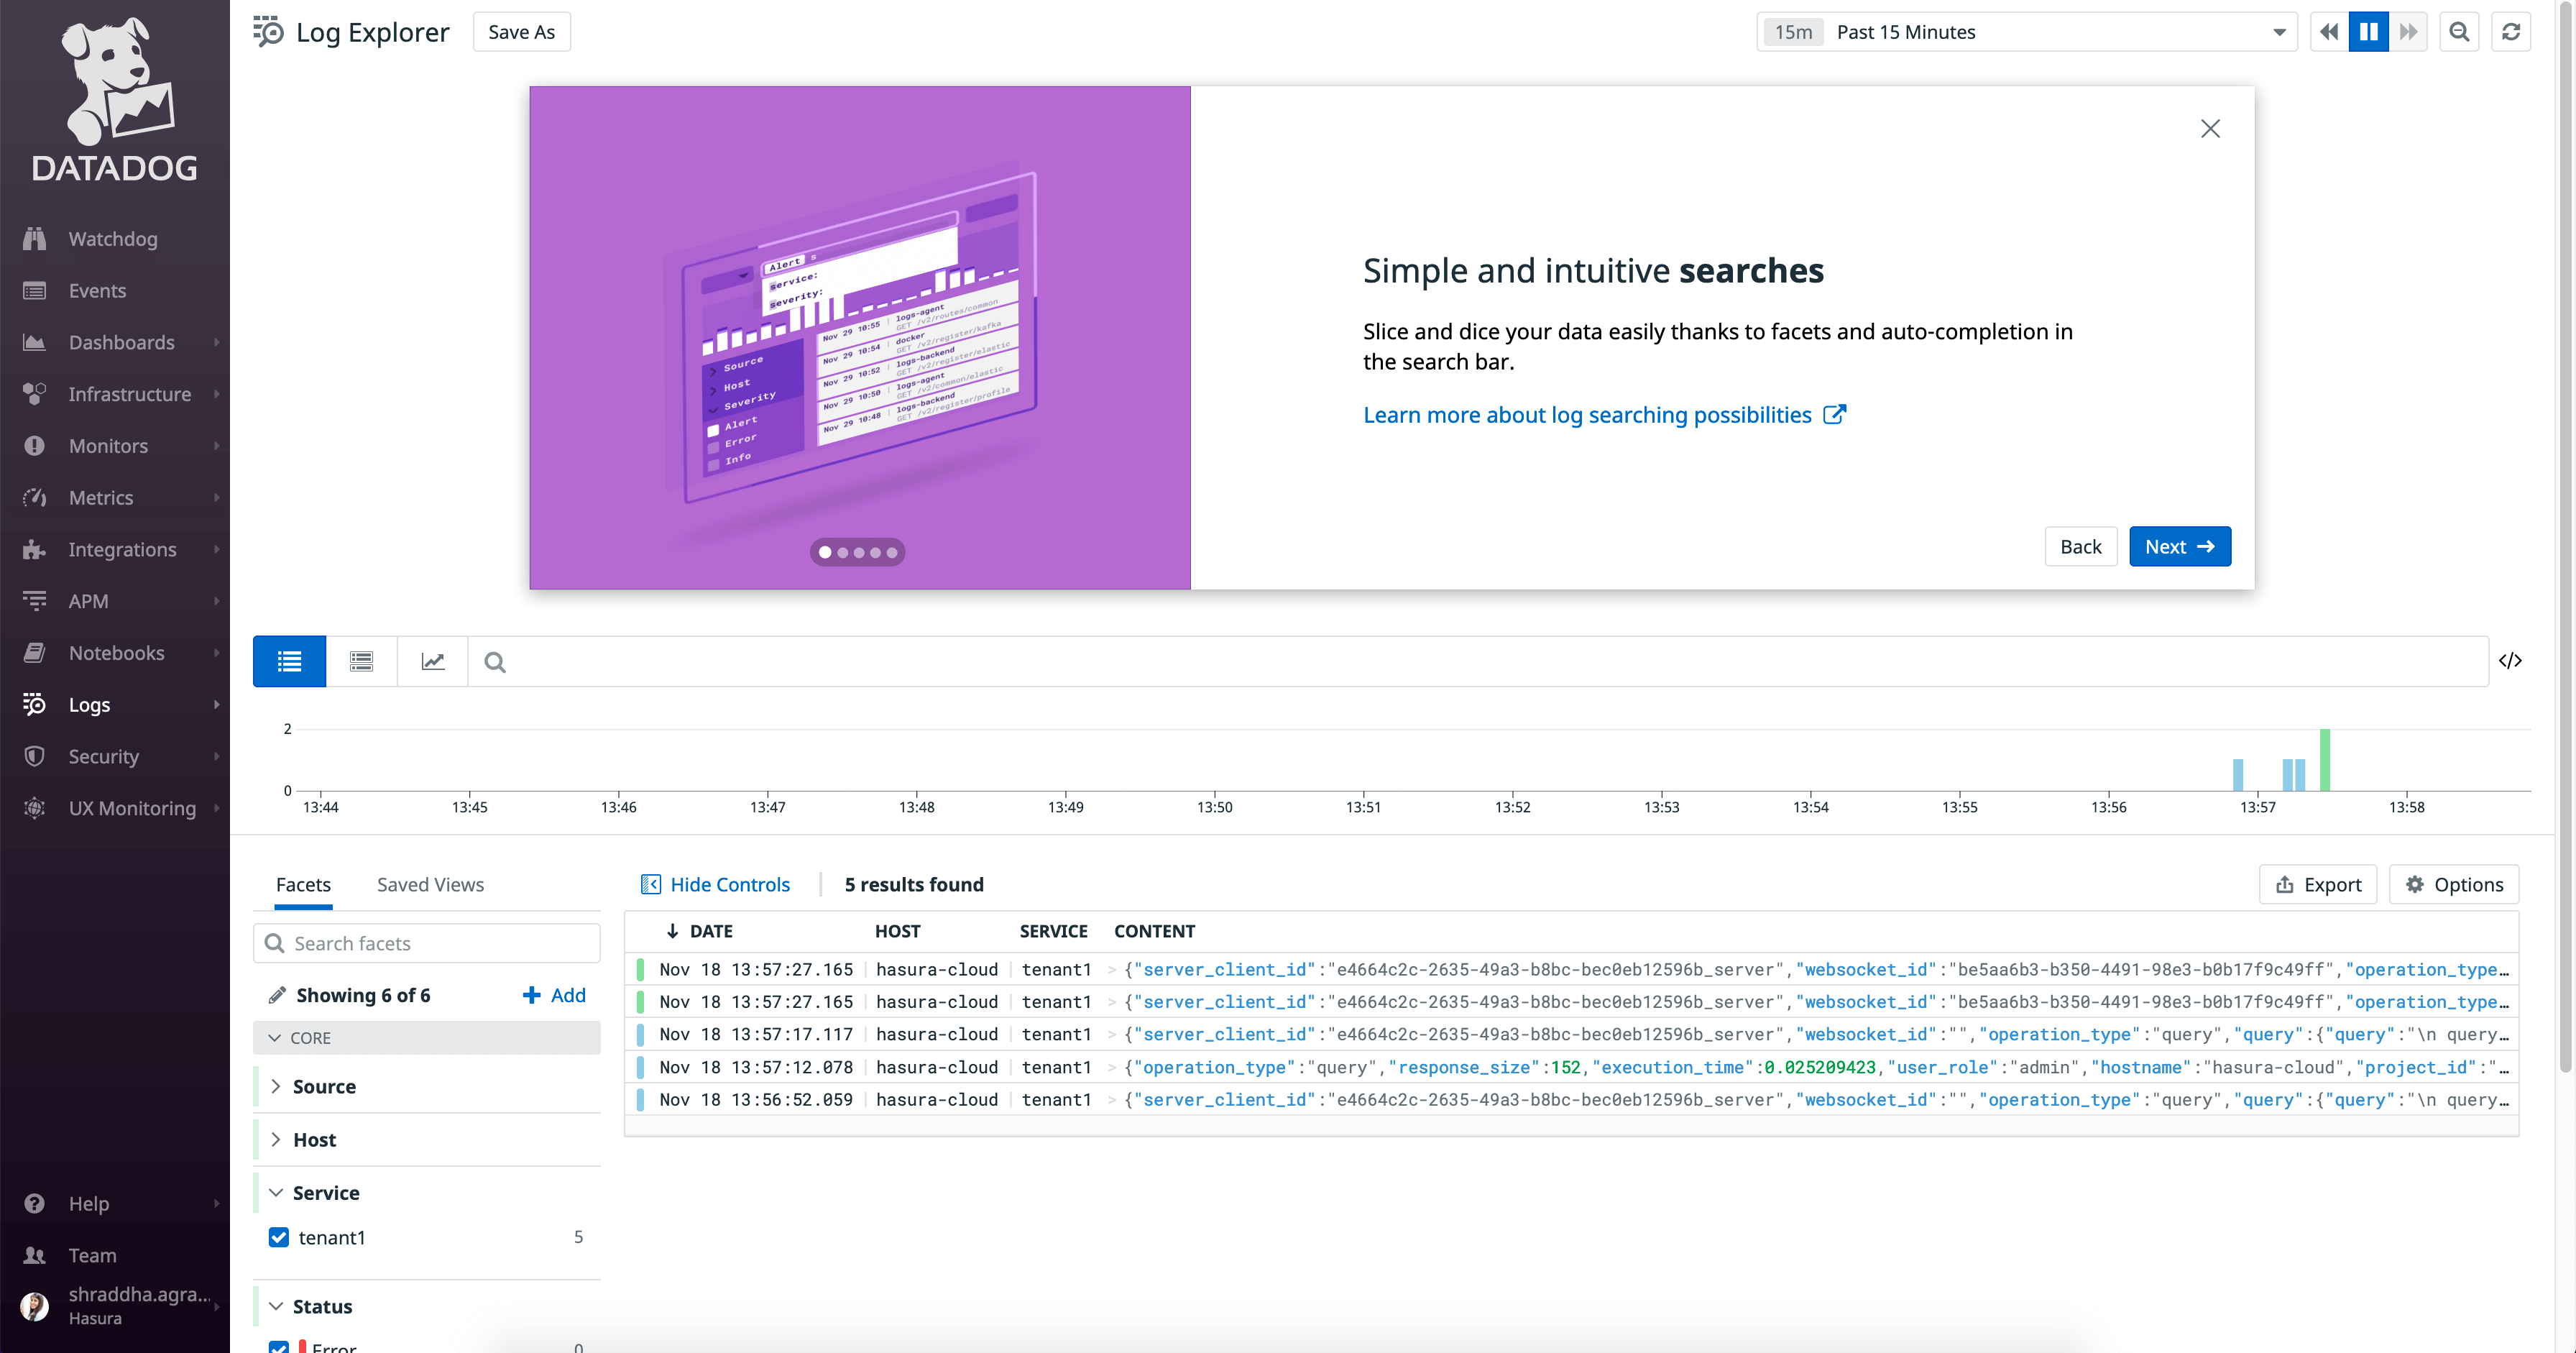 Logs successfully exported to Datadog